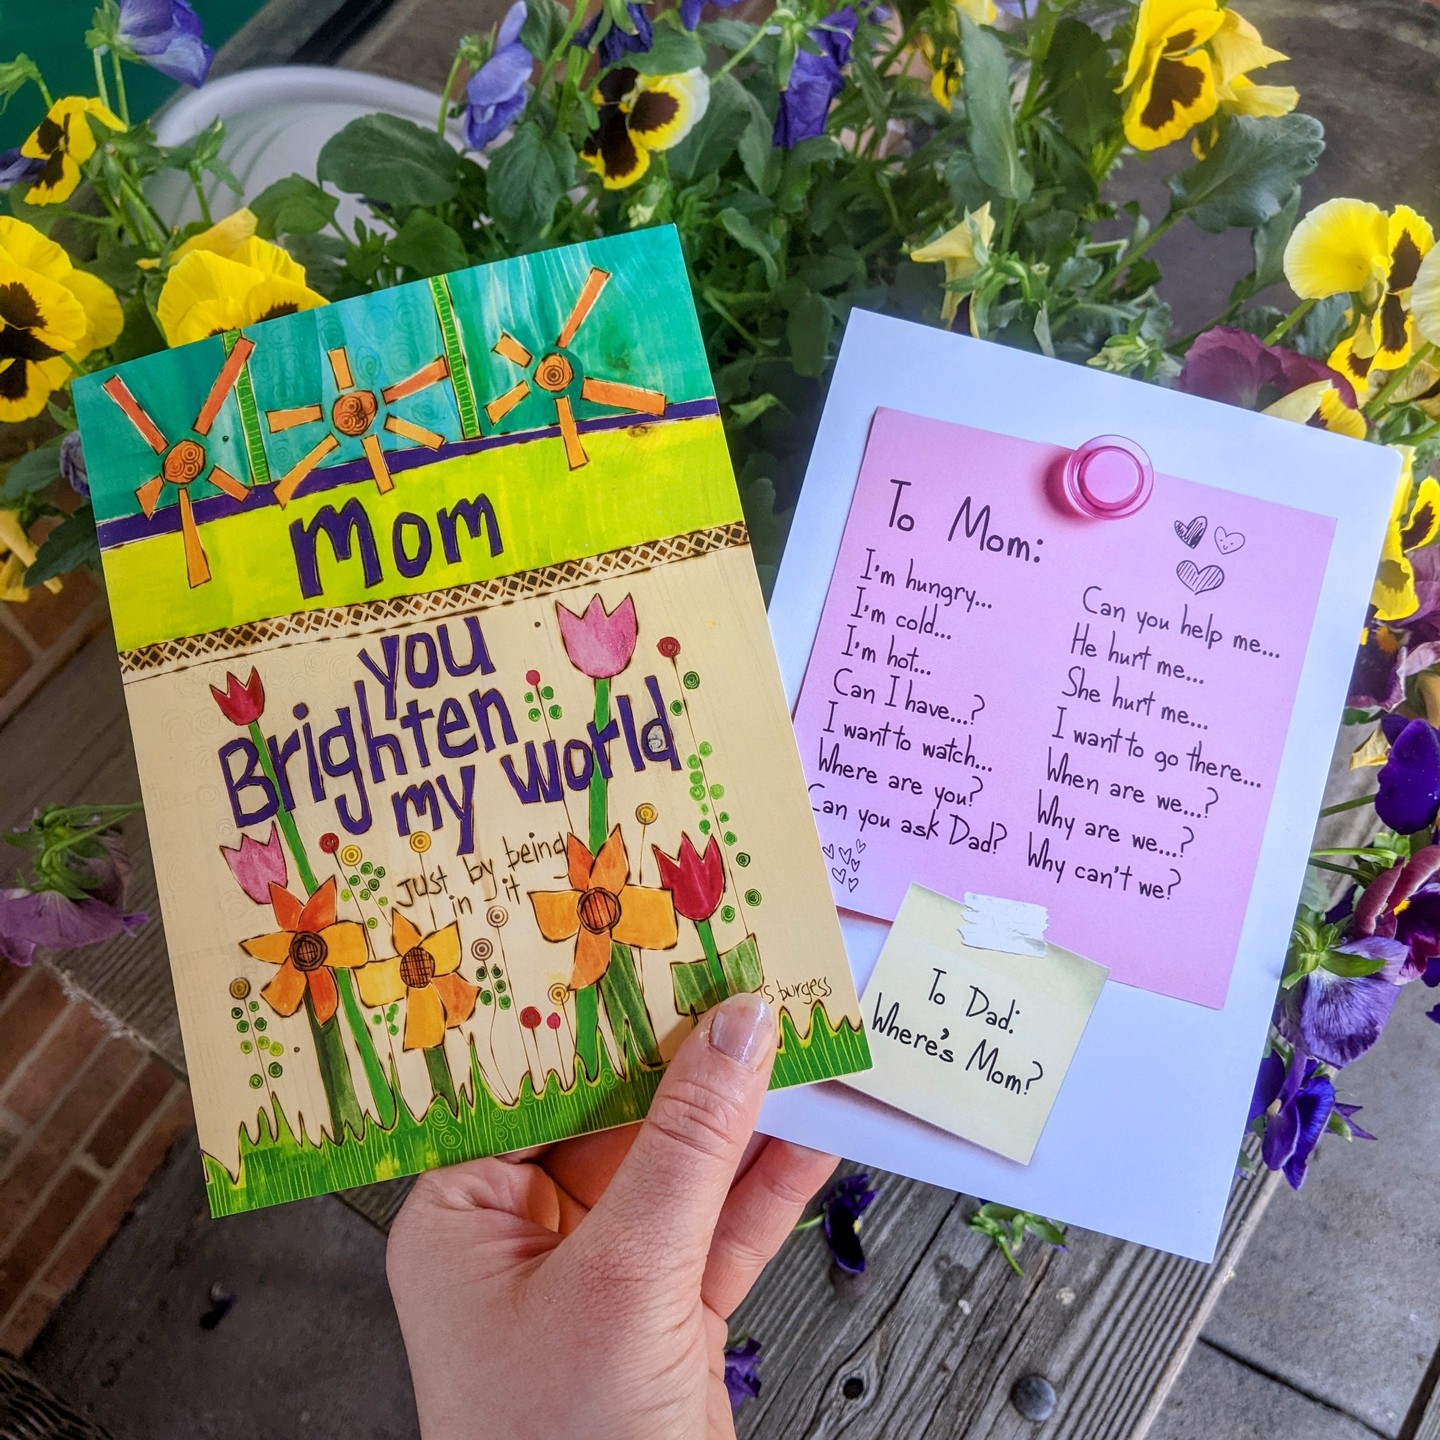 Get your Mother's Day cards here at Harmony! Just in time to get them in the mail! #mothersday #mothersday2022 #mothersdaycard #greetingcard #leanintree #harmony #harmonyfarms #seeyouinharmony #shoplocal #shoplocalraleigh #harmonizeyourlife